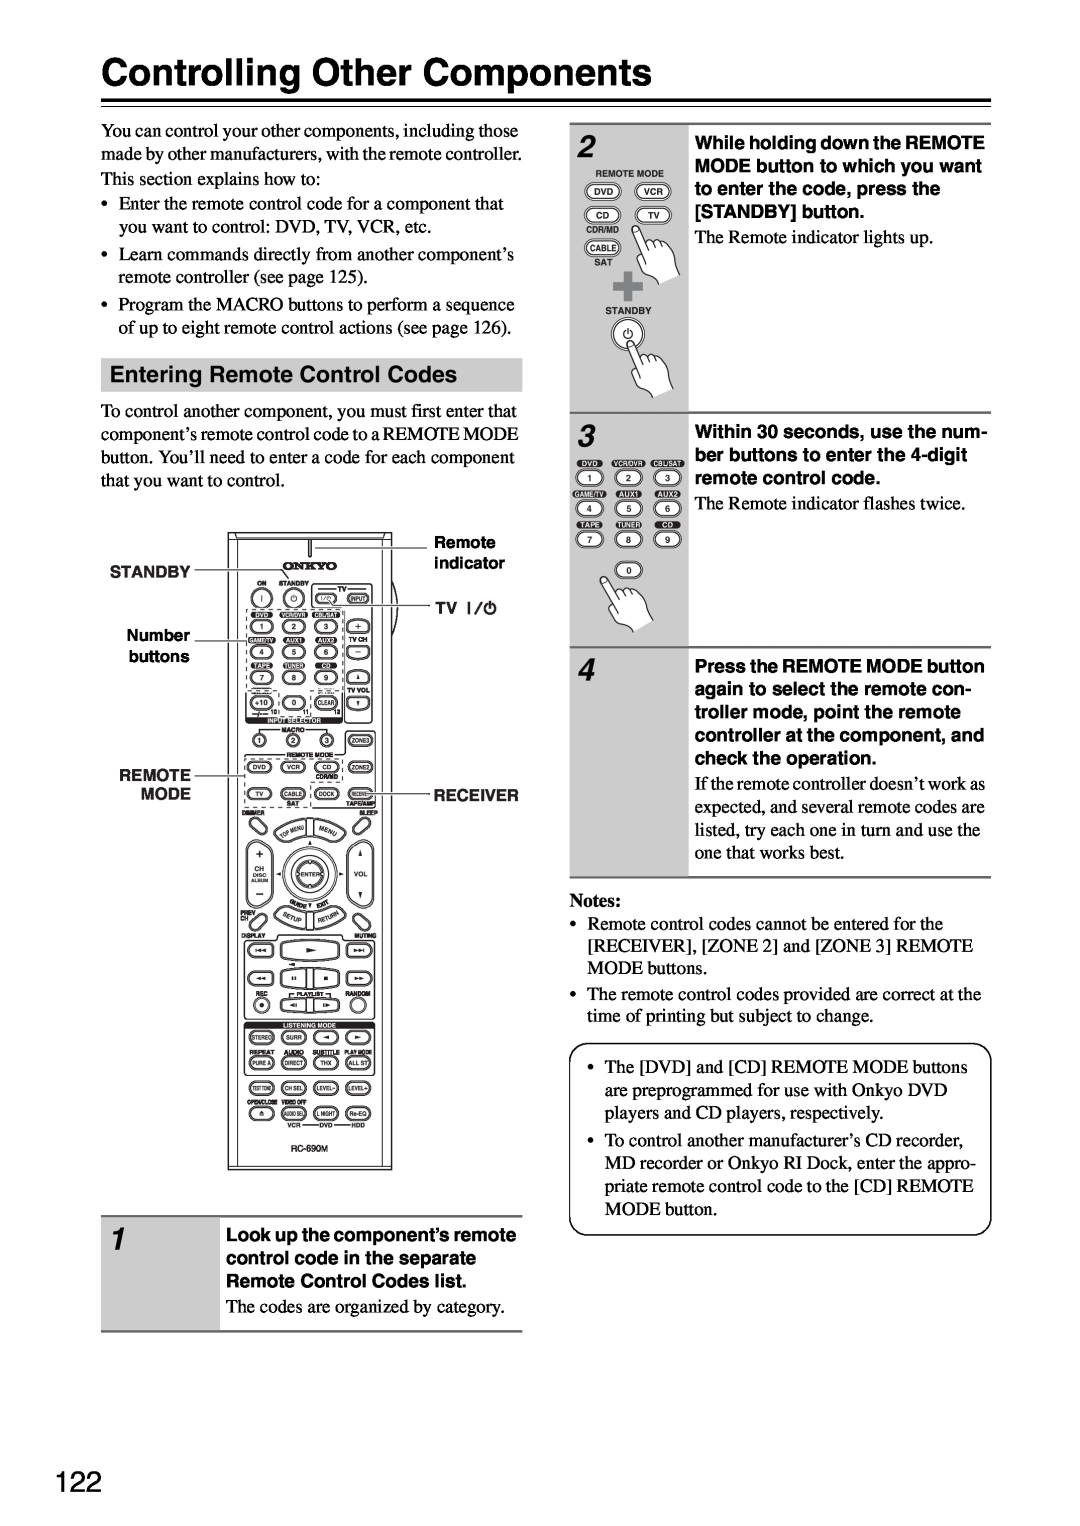 Onkyo PR-SC886 Controlling Other Components, Entering Remote Control Codes, The codes are organized by category, Notes 